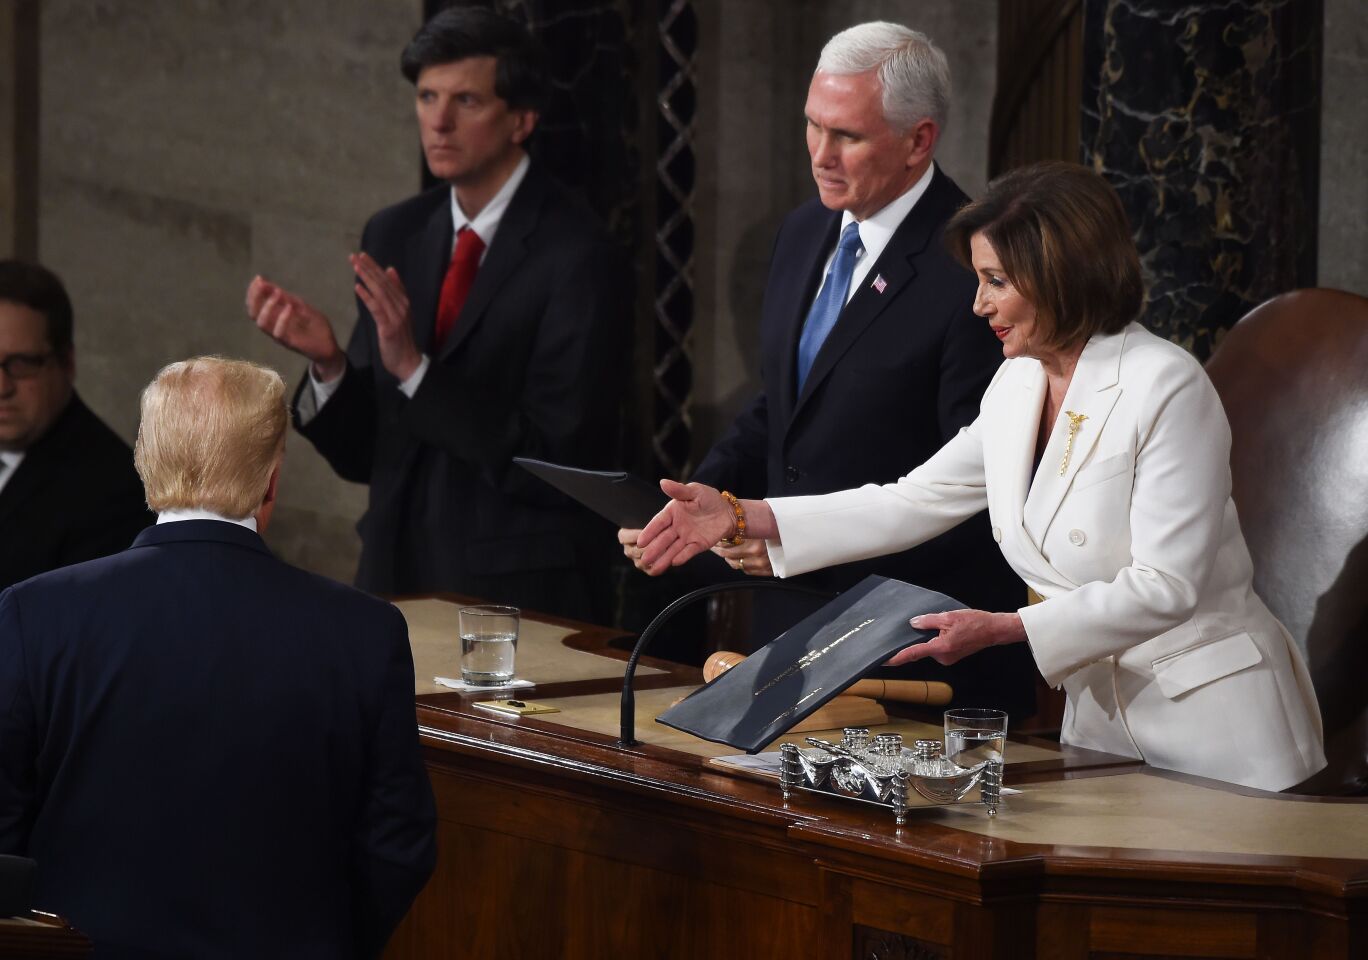 Speaker of the US House of Representatives Nancy Pelosi extends a hand to US president Donald Trump ahead of the State of the Union address at the US Capitol in Washington, DC, on February 4, 2020. (Photo by Olivier DOULIERY / AFP) (Photo by OLIVIER DOULIERY/AFP via Getty Images) ** OUTS - ELSENT, FPG, CM - OUTS * NM, PH, VA if sourced by CT, LA or MoD **